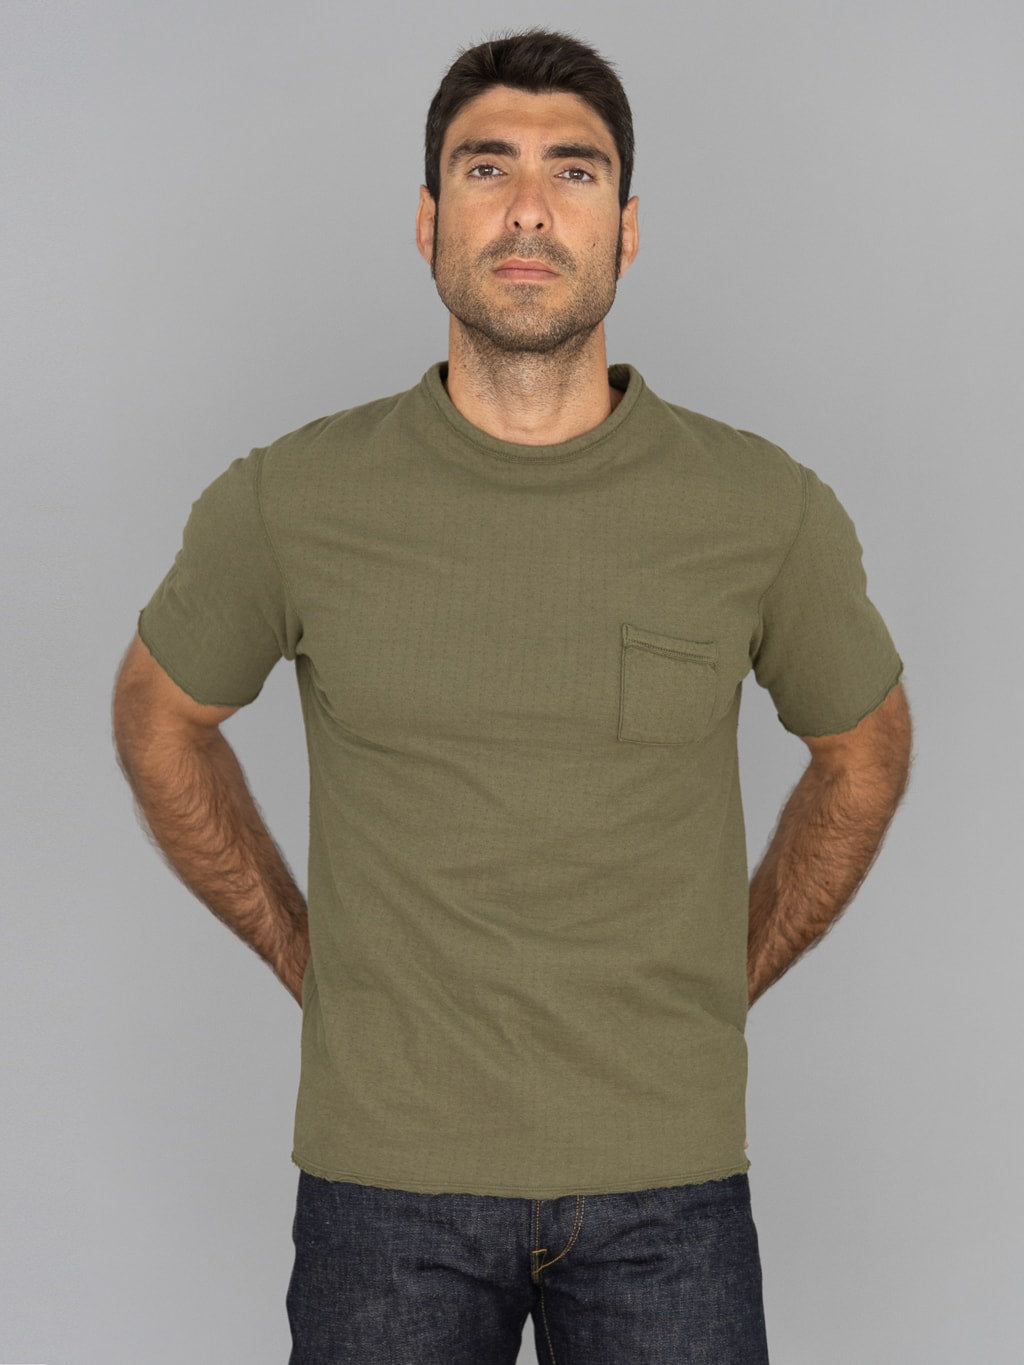 Loop and Weft Dual Layered Knit raw edge pocket TShirt olive fit